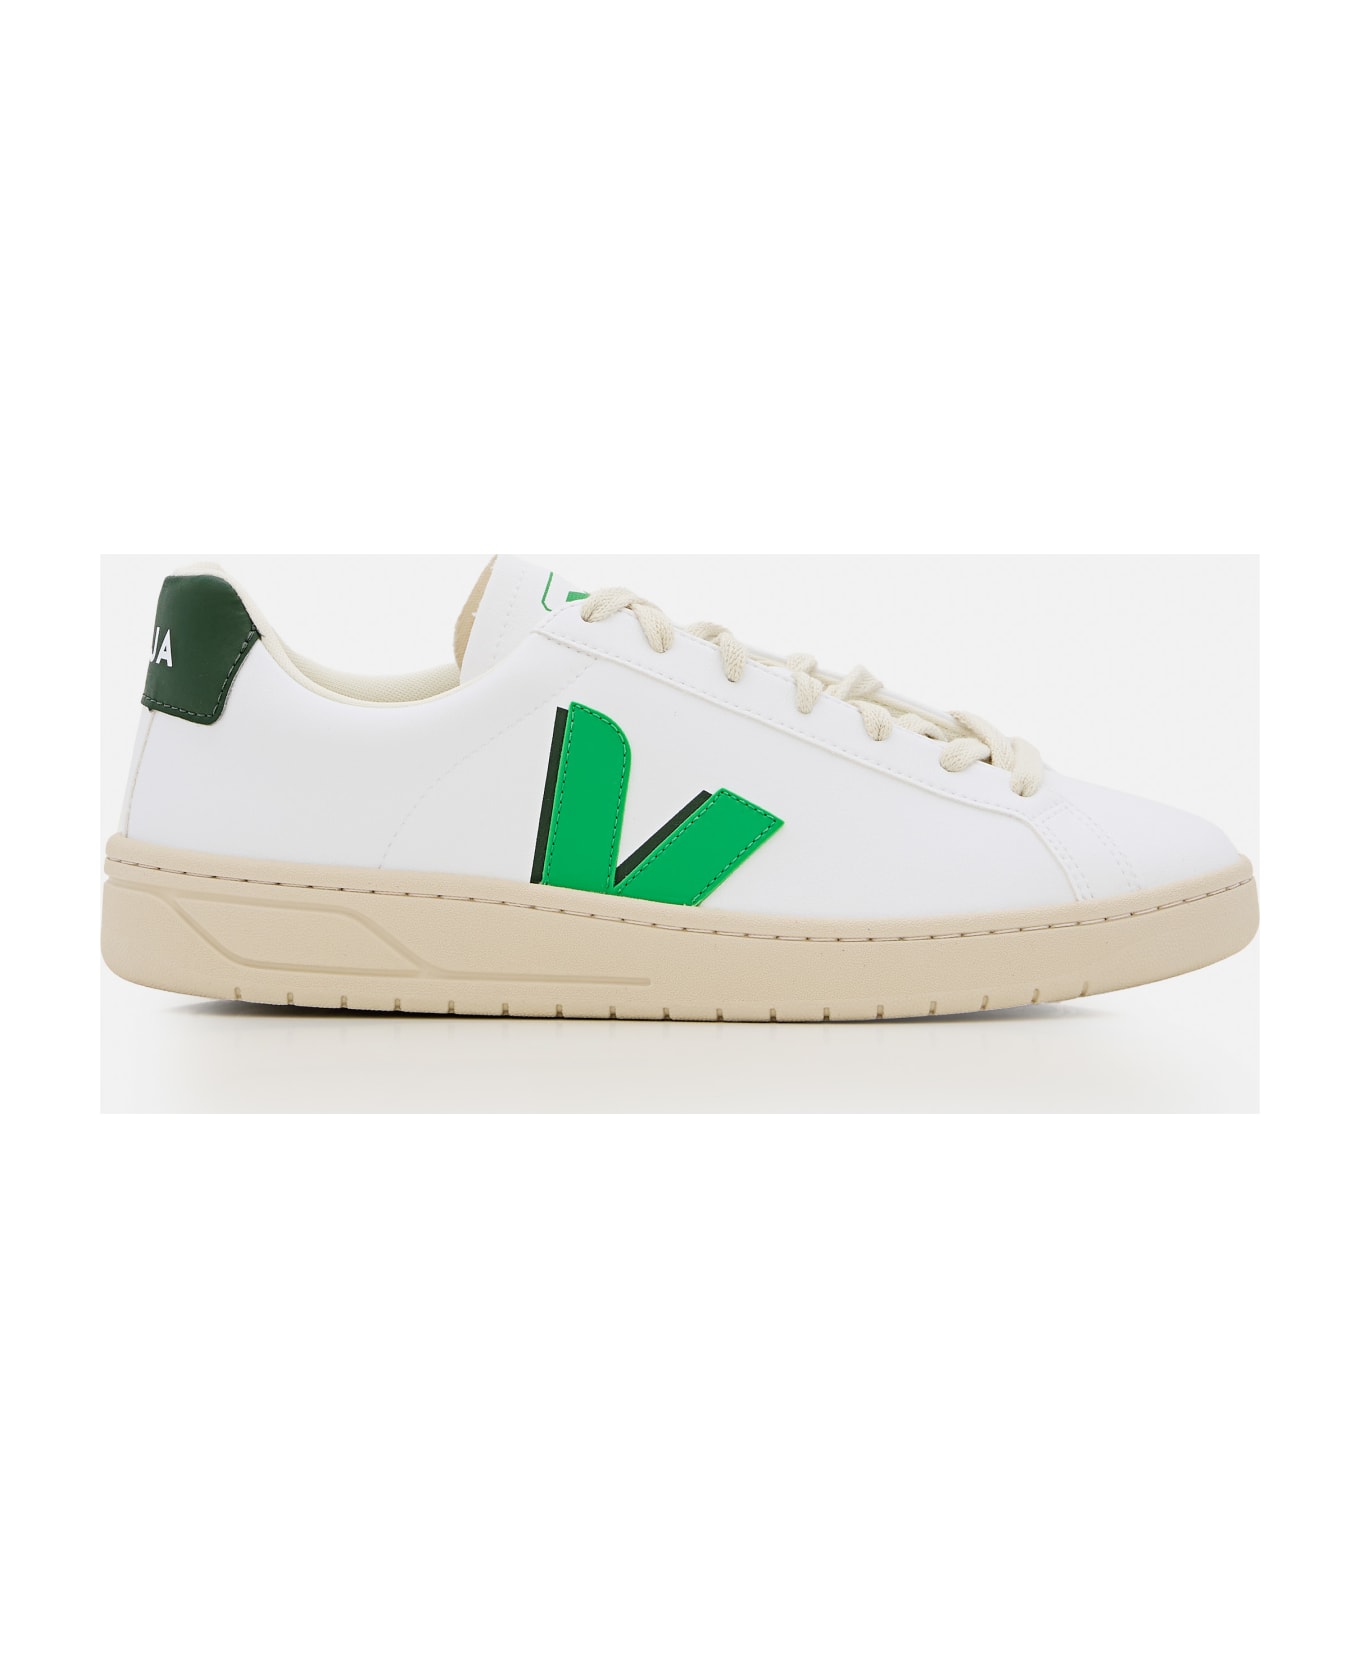 Veja Urca Leather Sneakers - White